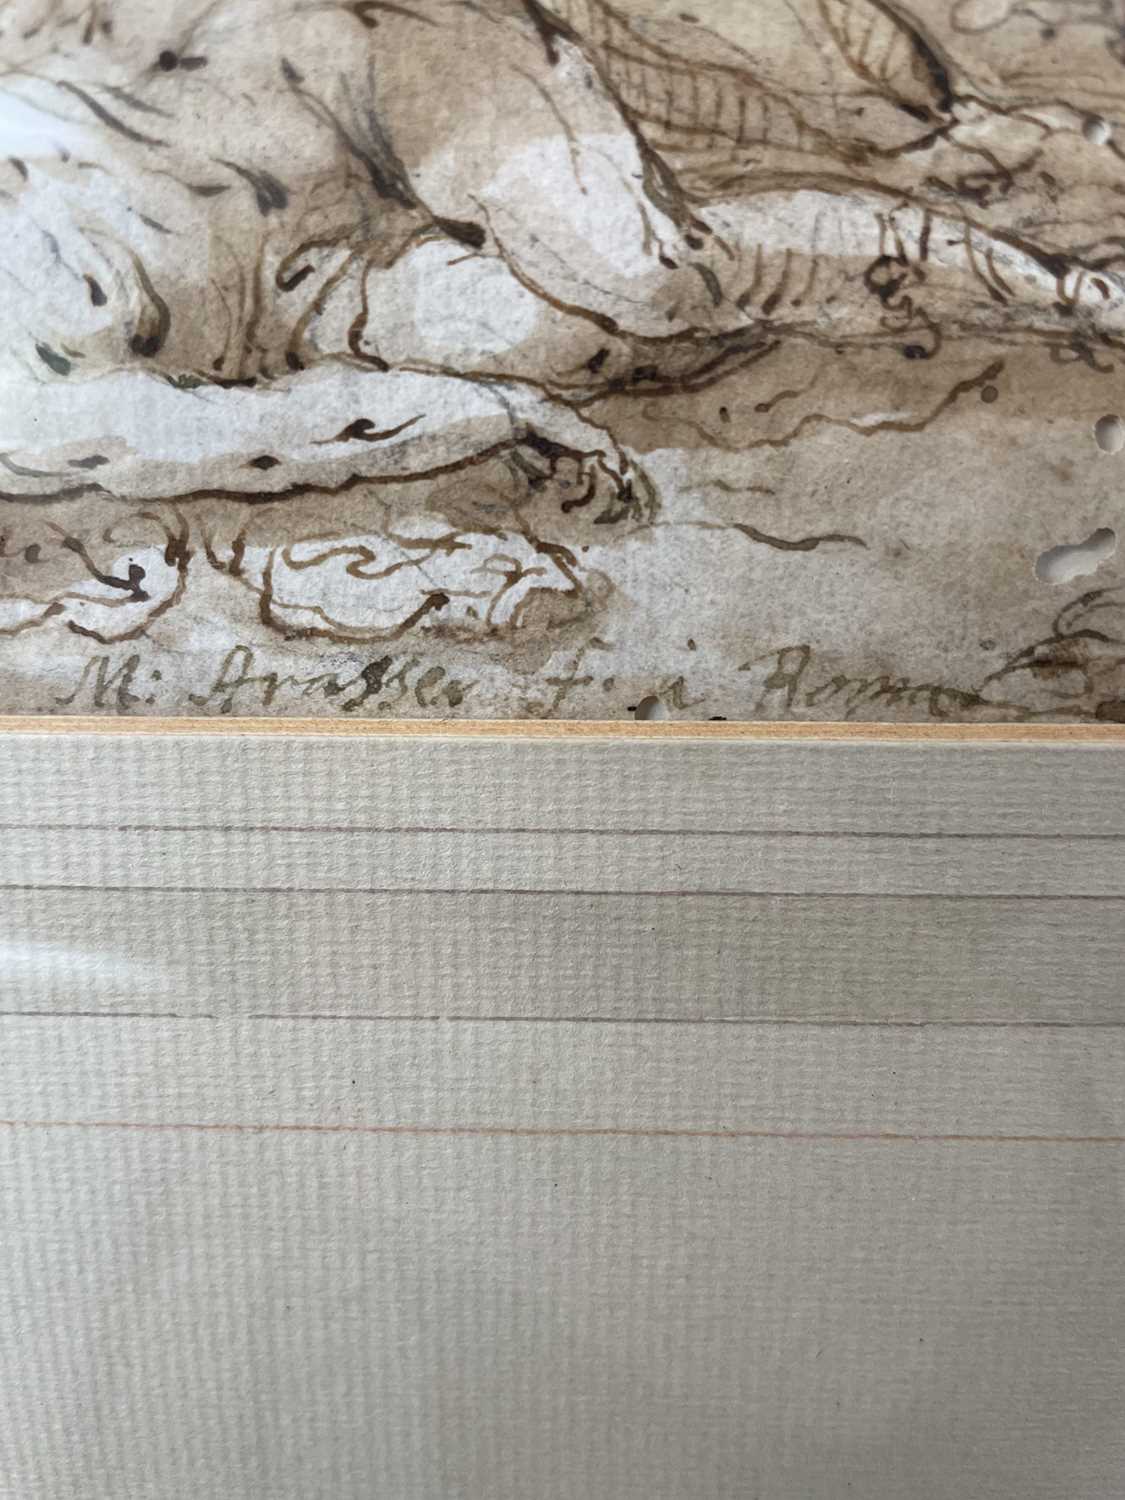 M *Arasser (17th/18th Century) Pyramus and Thisbe Signed and inscribed "Roma", brown ink and pencil, - Image 6 of 23